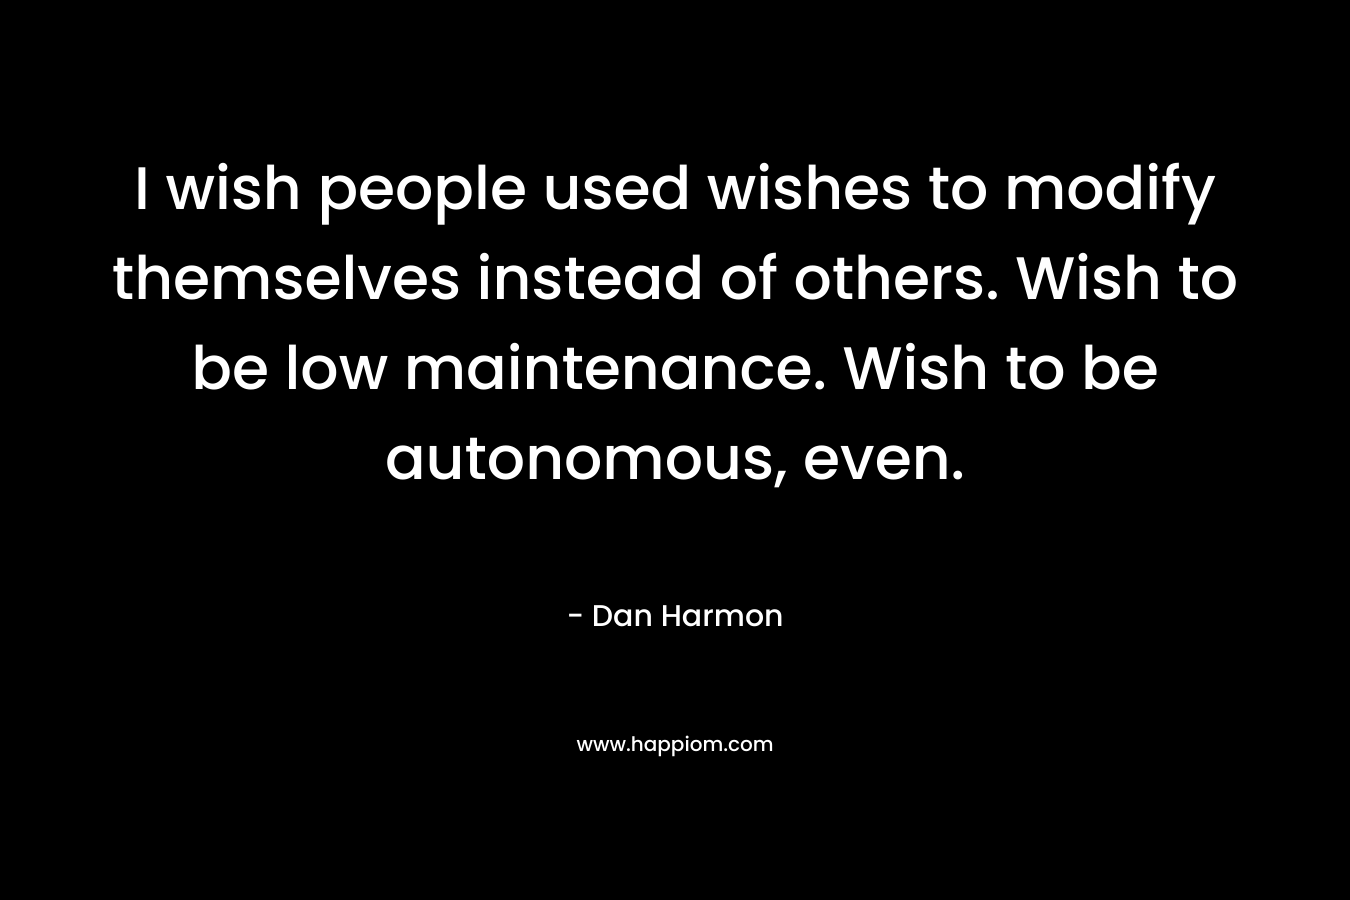 I wish people used wishes to modify themselves instead of others. Wish to be low maintenance. Wish to be autonomous, even.